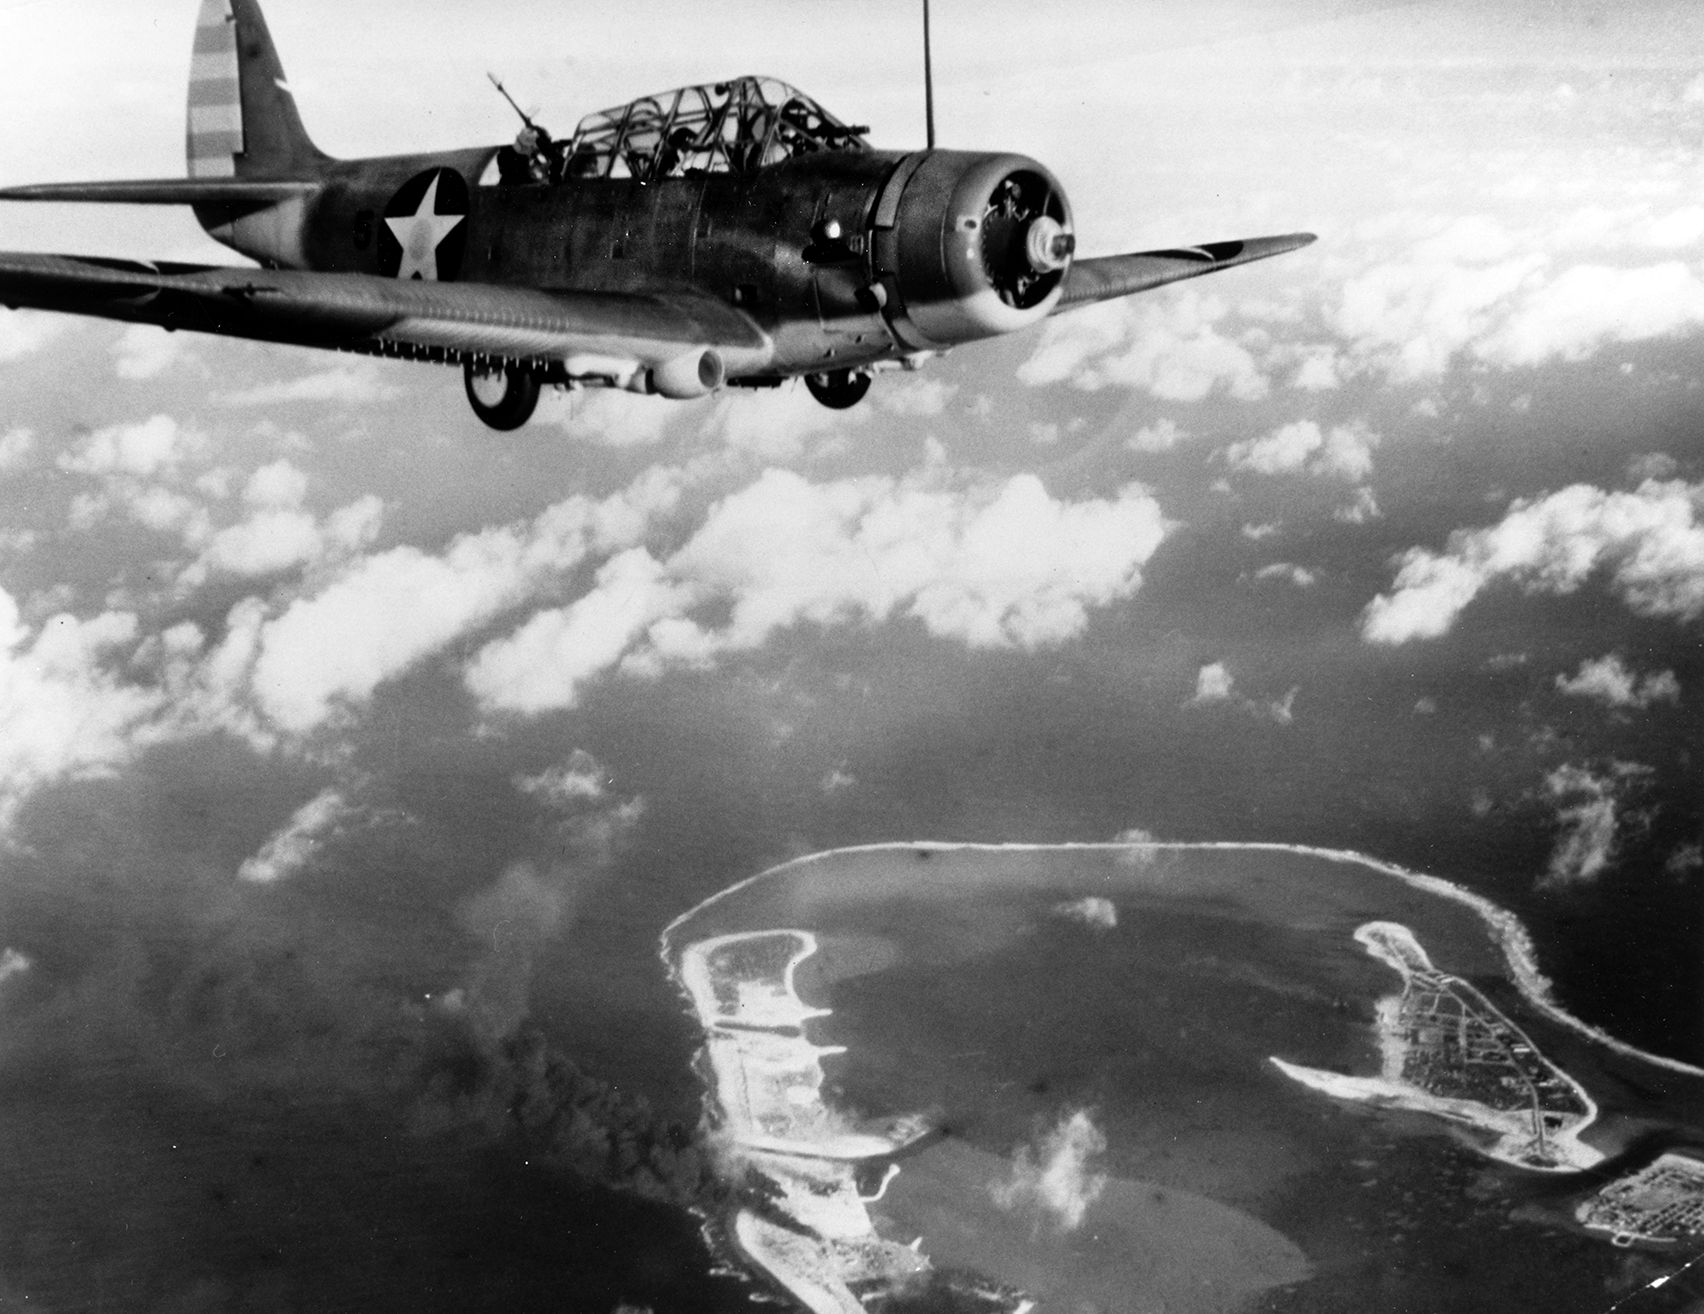 A Douglas TBD Devastator torpedo bomber over the Japanese-held Wake Island atoll during a raid on February 24, 1942. Obsolescent as World War II began, the Devastators suffered heavy losses during the Battle of Midway four months later.